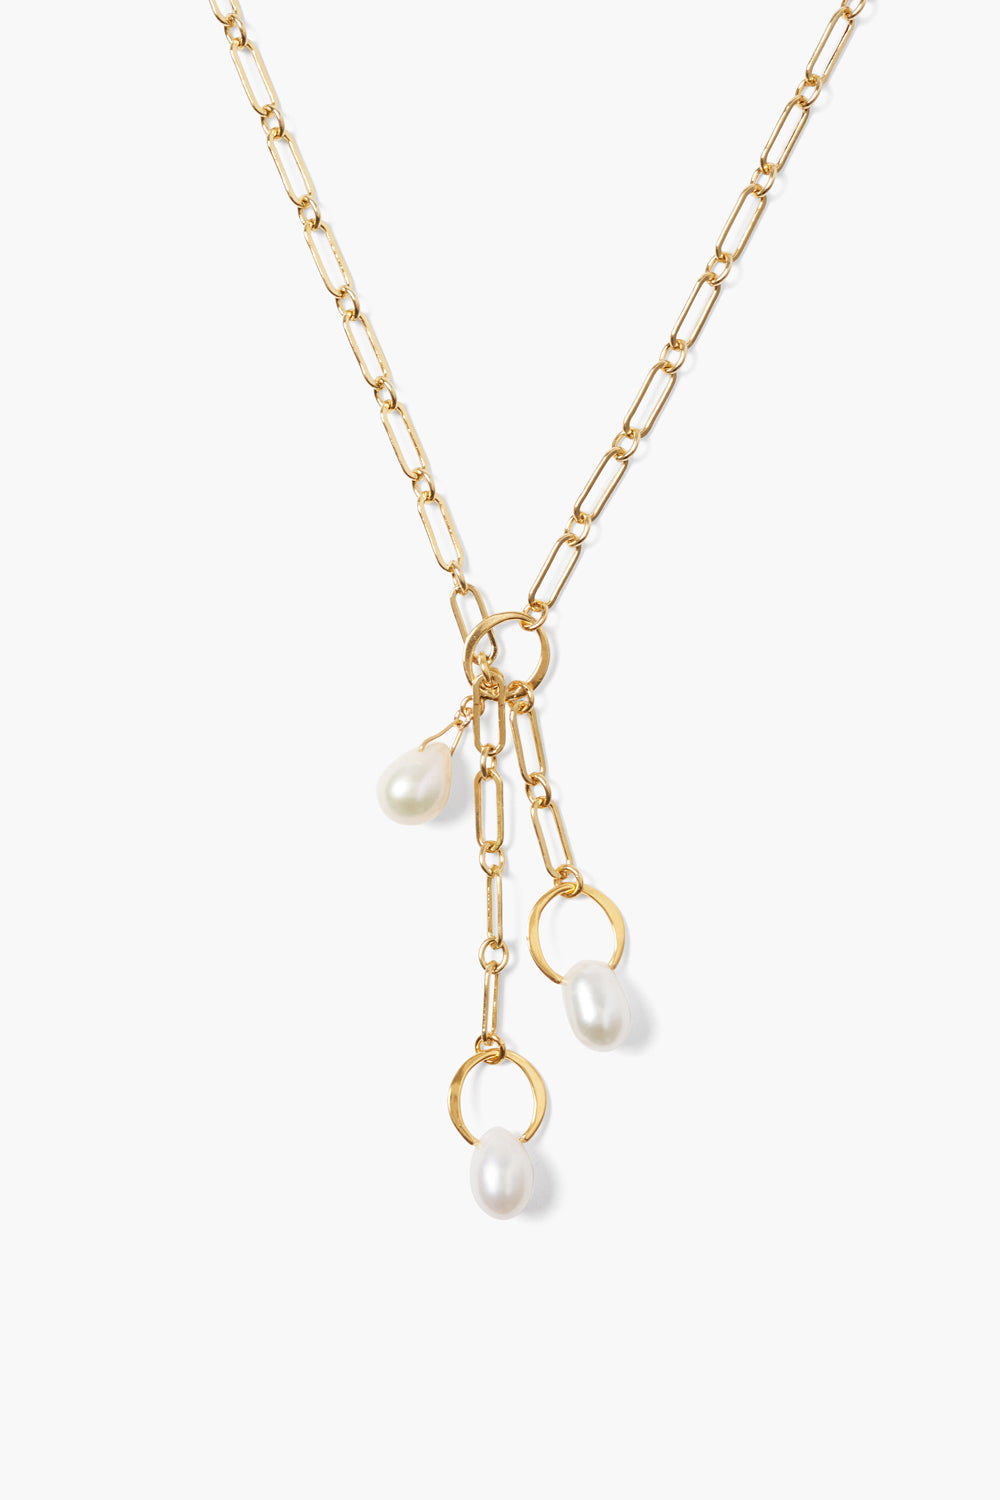 WHITE PEARL FRESHWATER CHAIN NECKLACE